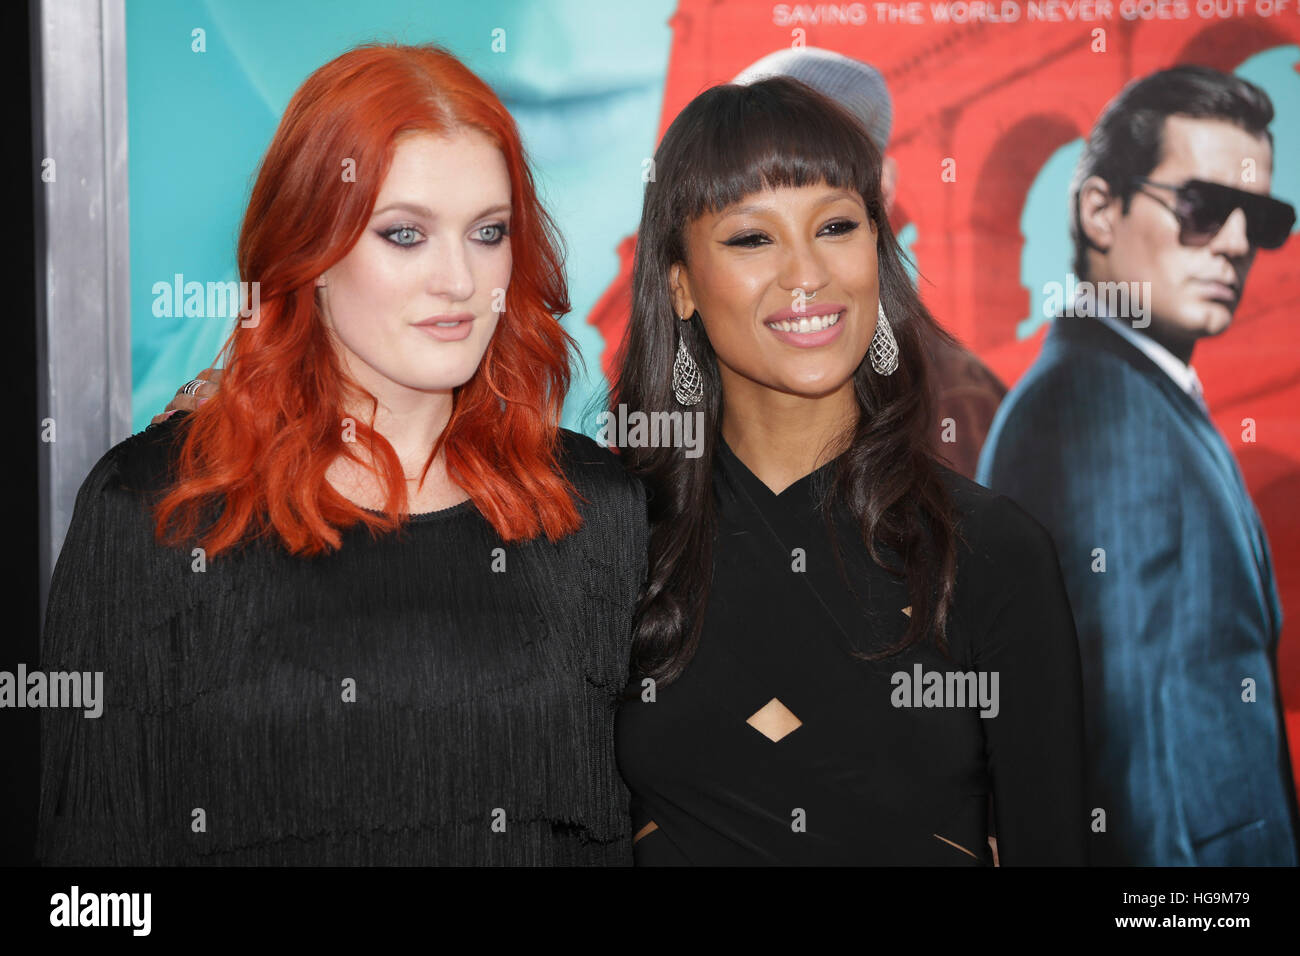 Icona Pop (Aino Jawo and Caroline Hjelt) arrive at The Man From U.N.C.L.E premiere at the Zigfield Theater in NYC. Stock Photo